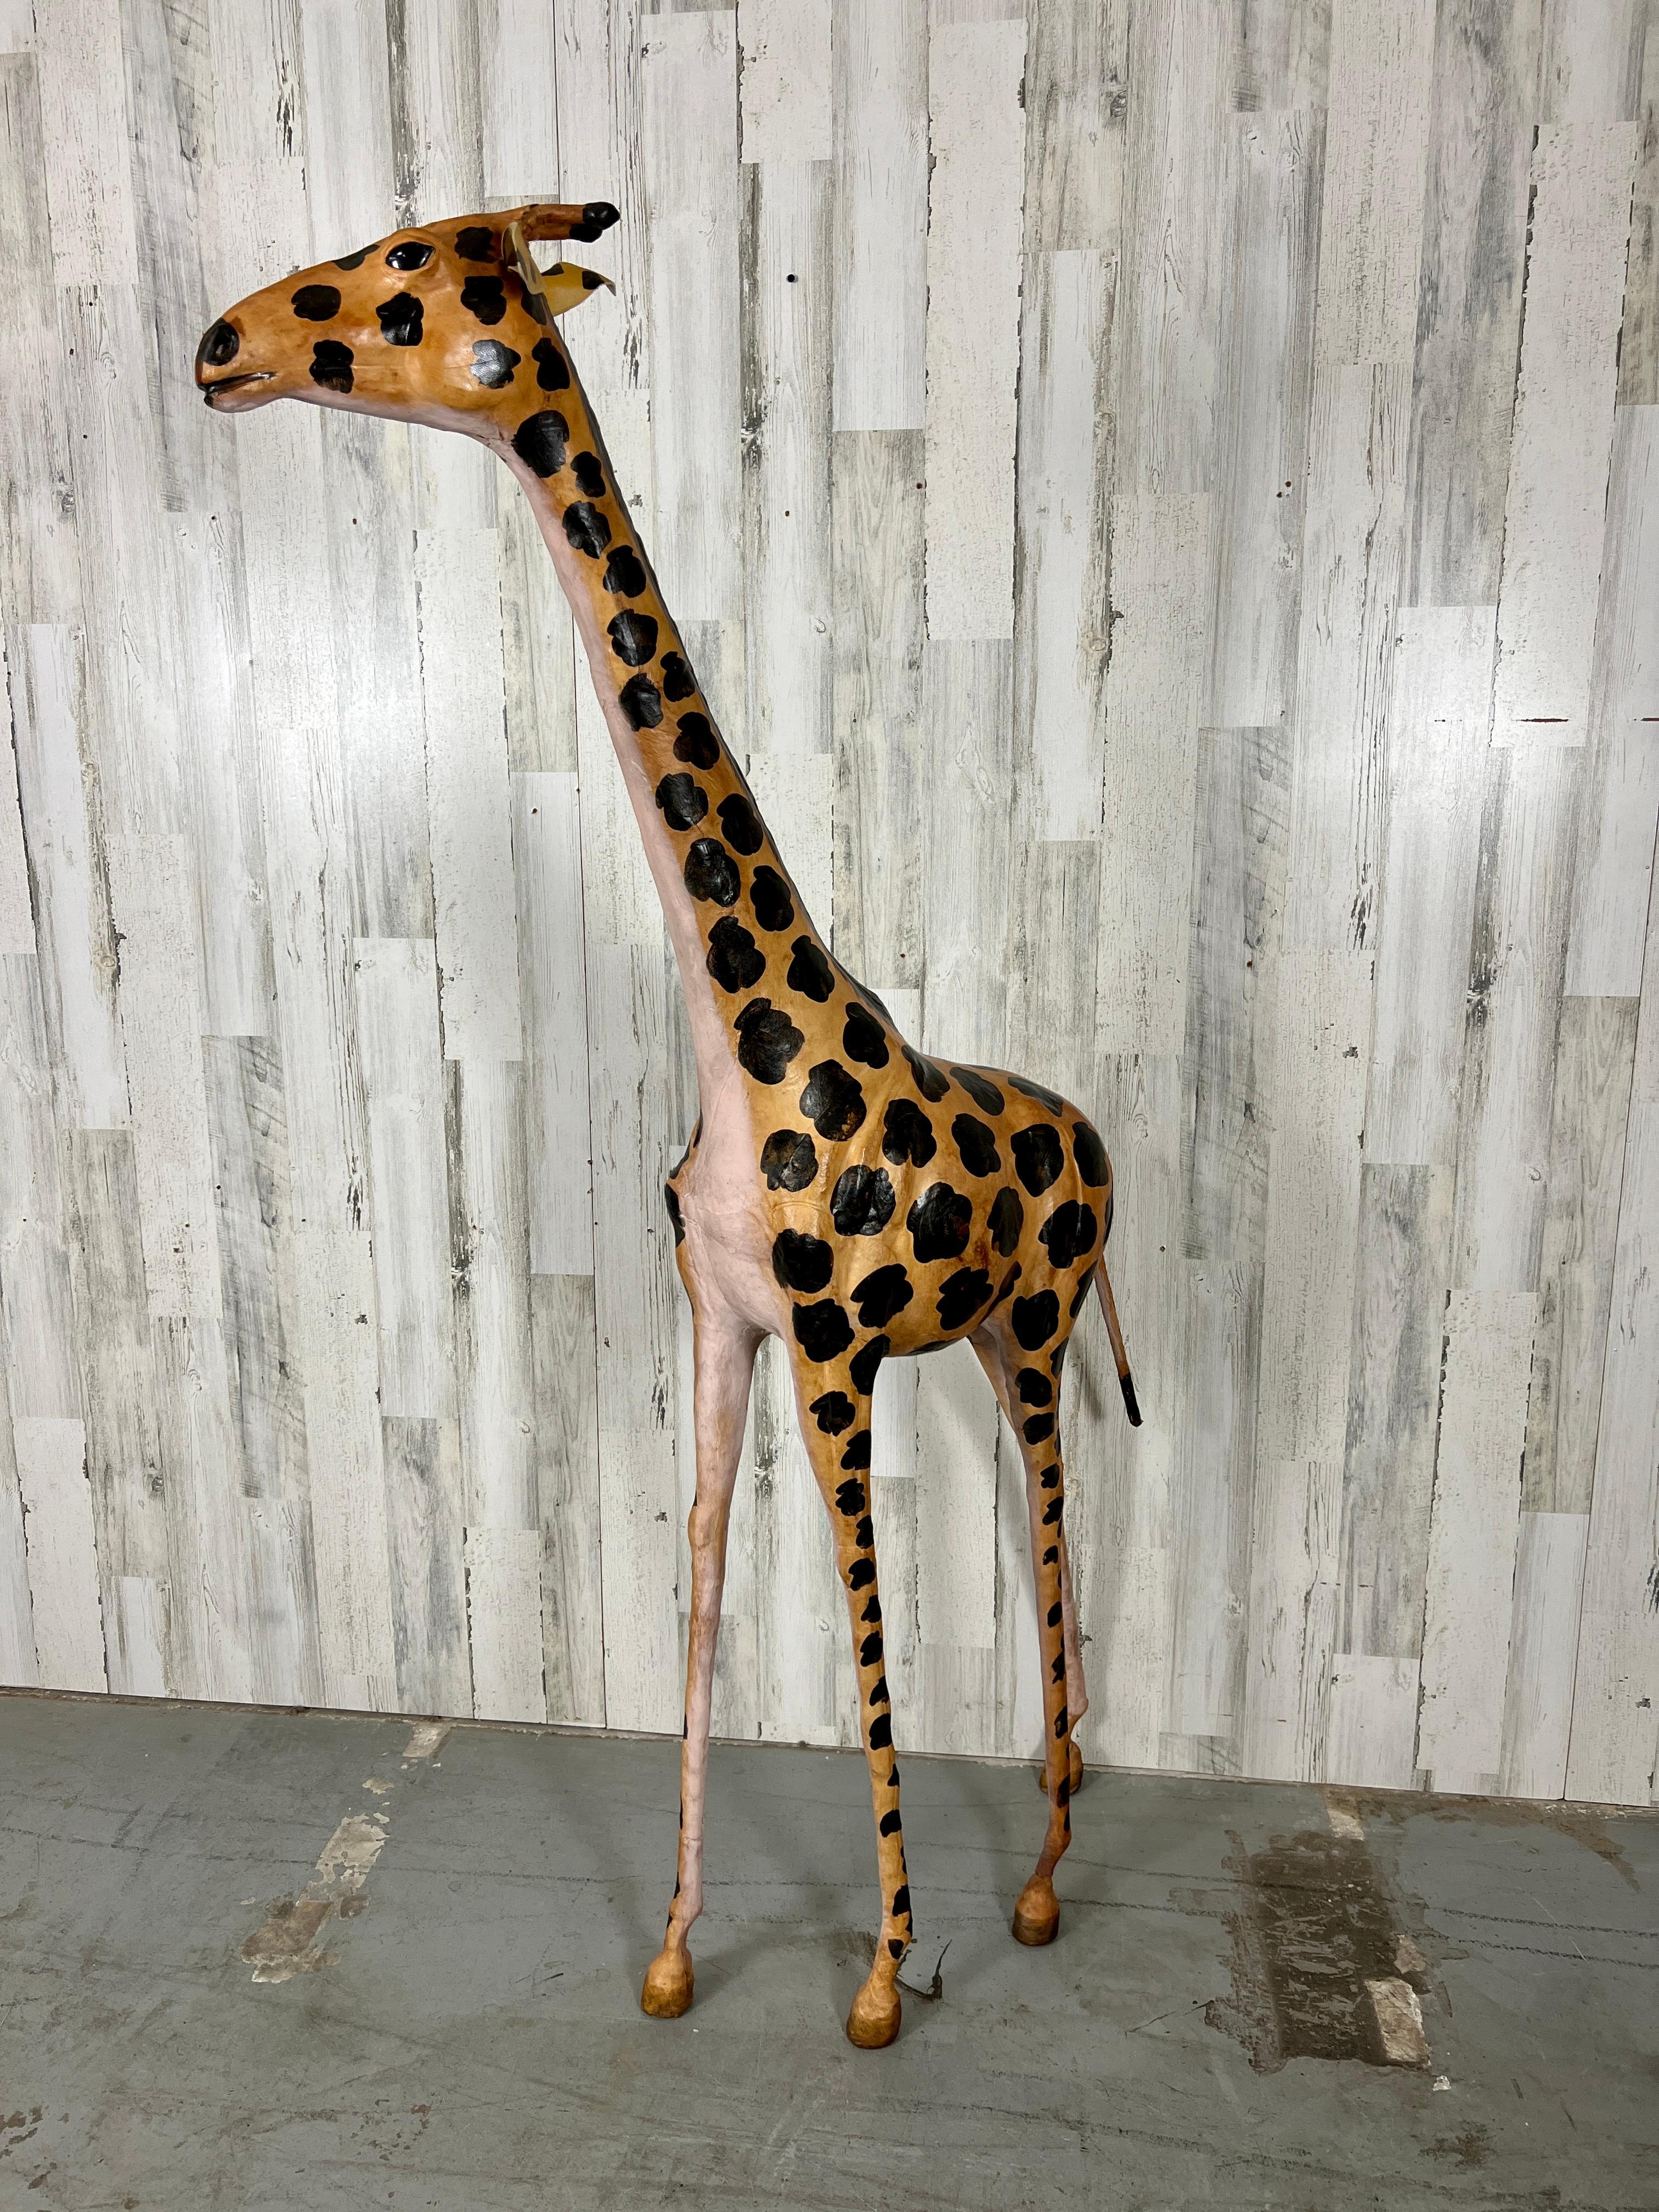 Organic Modern Large Leather Wrapped Hand Painted Giraffe Sculpture  For Sale